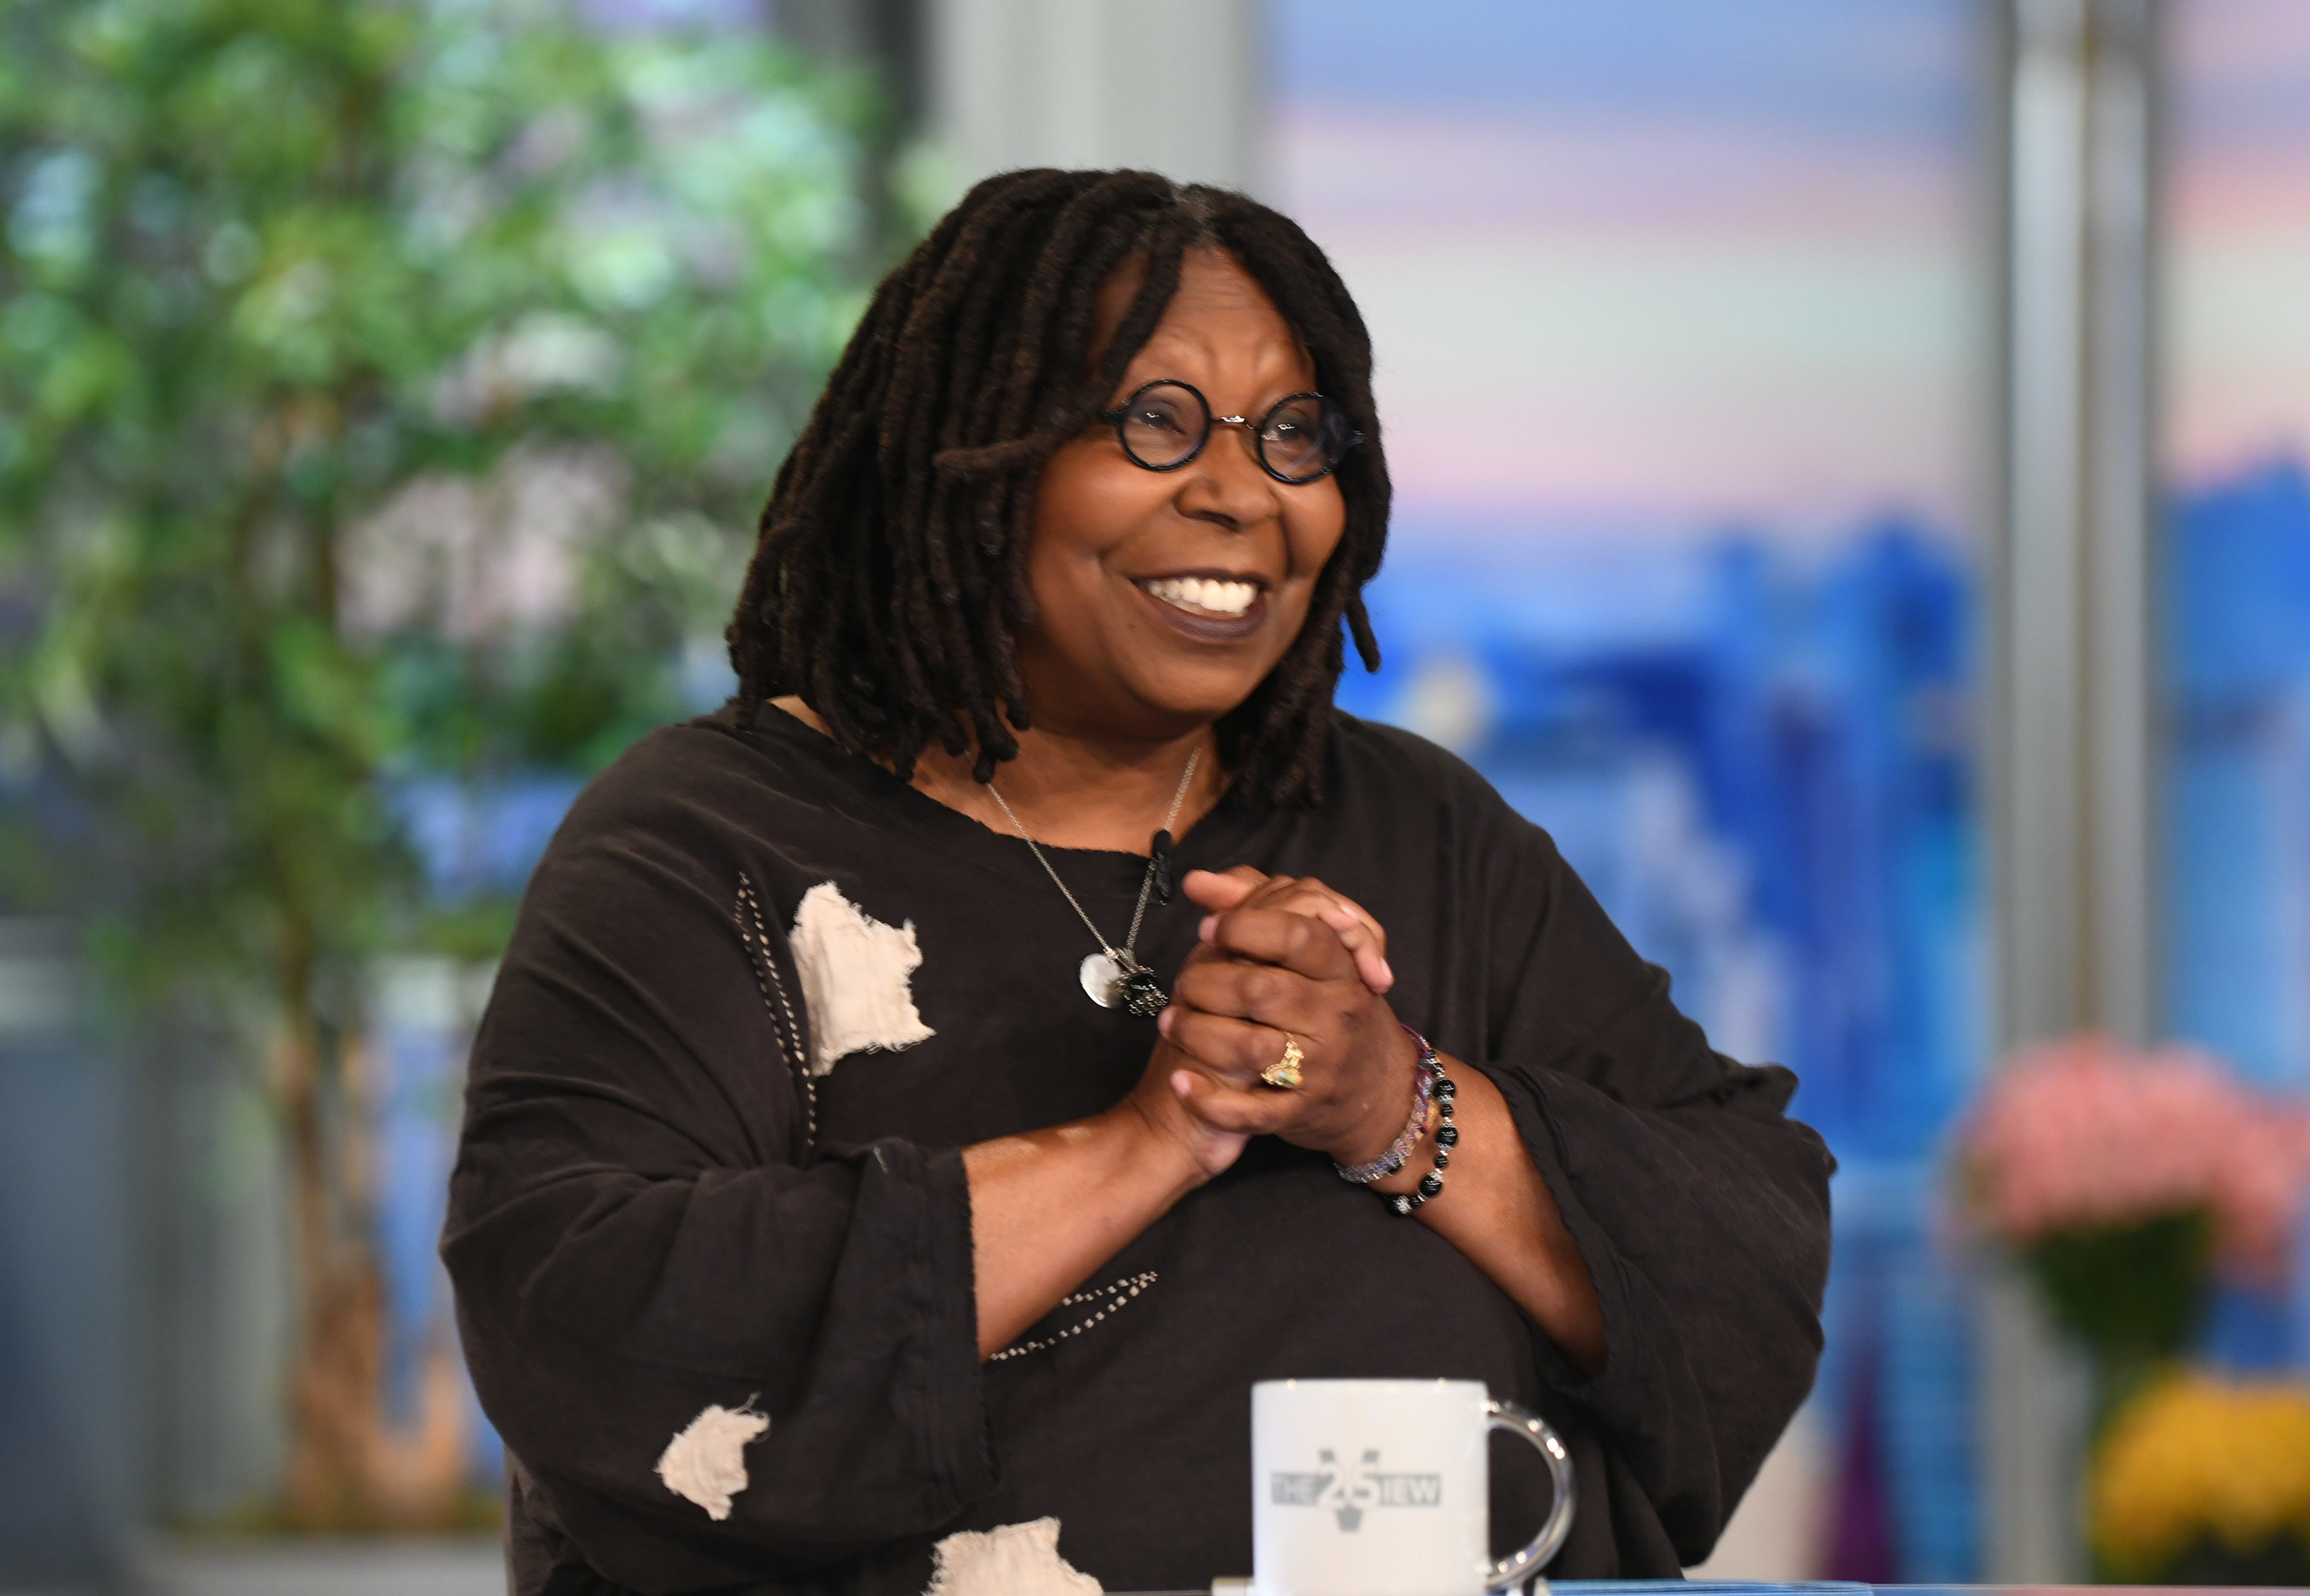 Whoopi Goldberg on "The View" with hands clasped together smiling